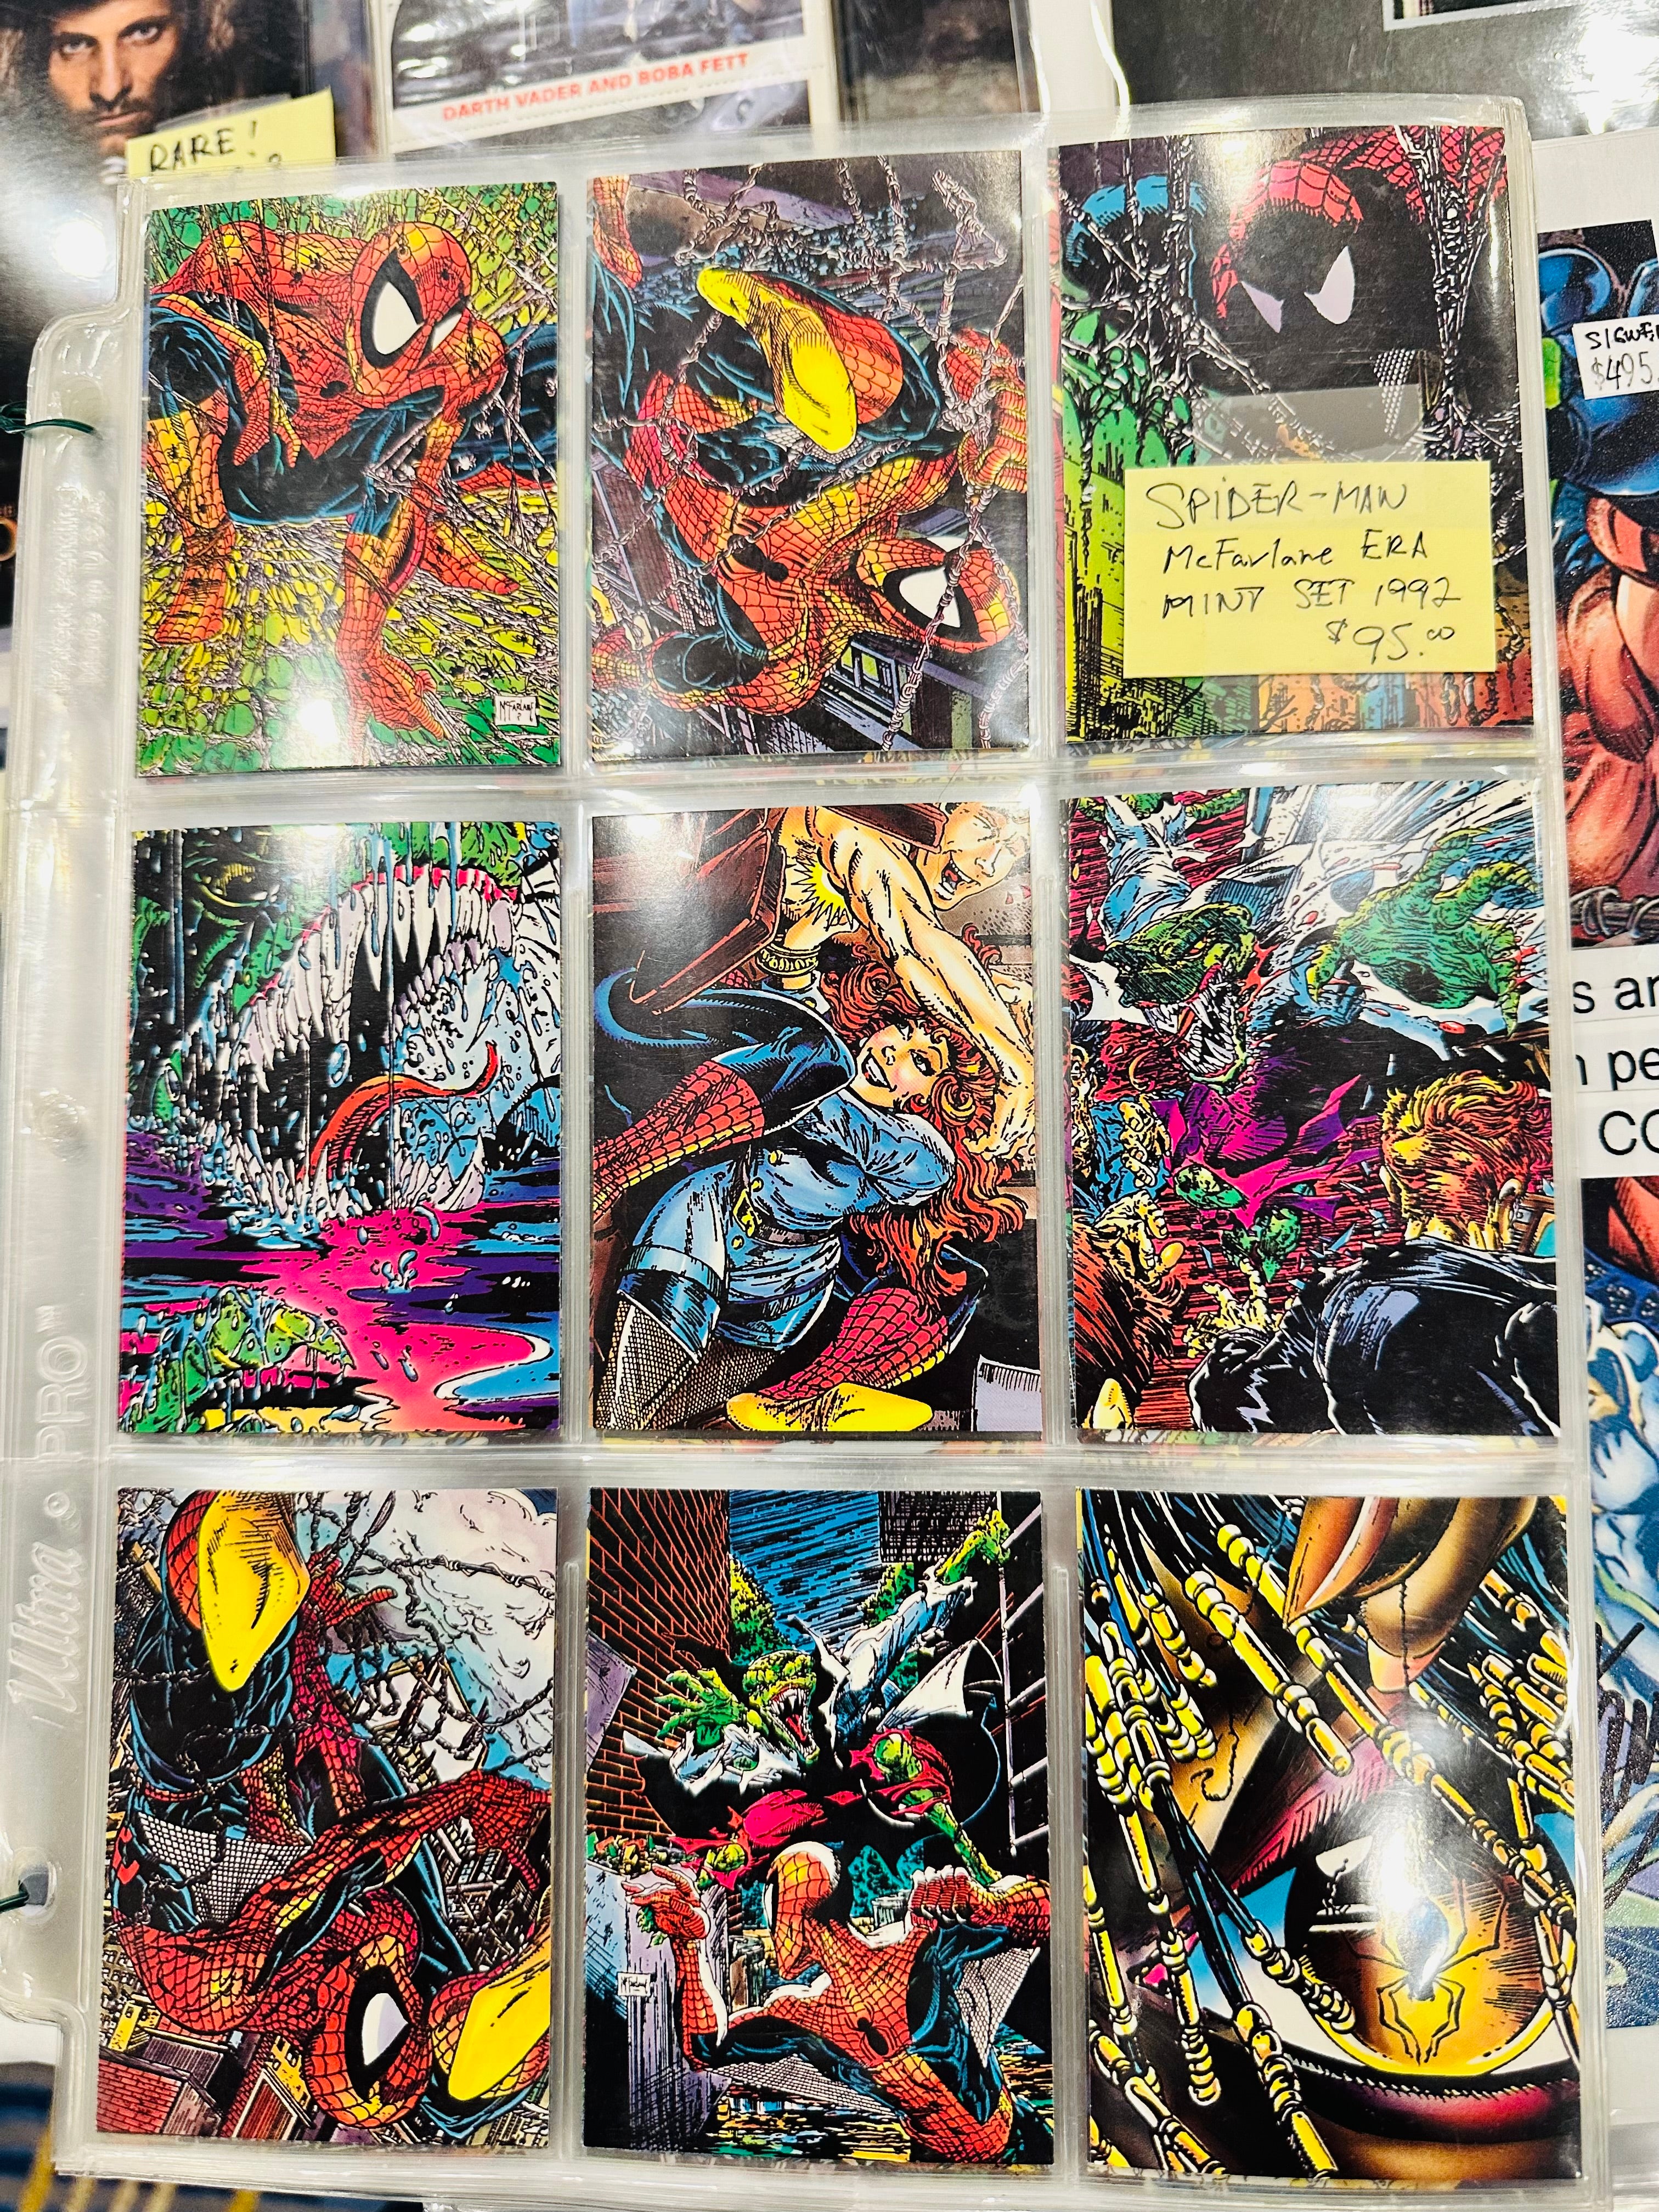 Spider-Man McFarlane Era rare mint condition set in pages 1992